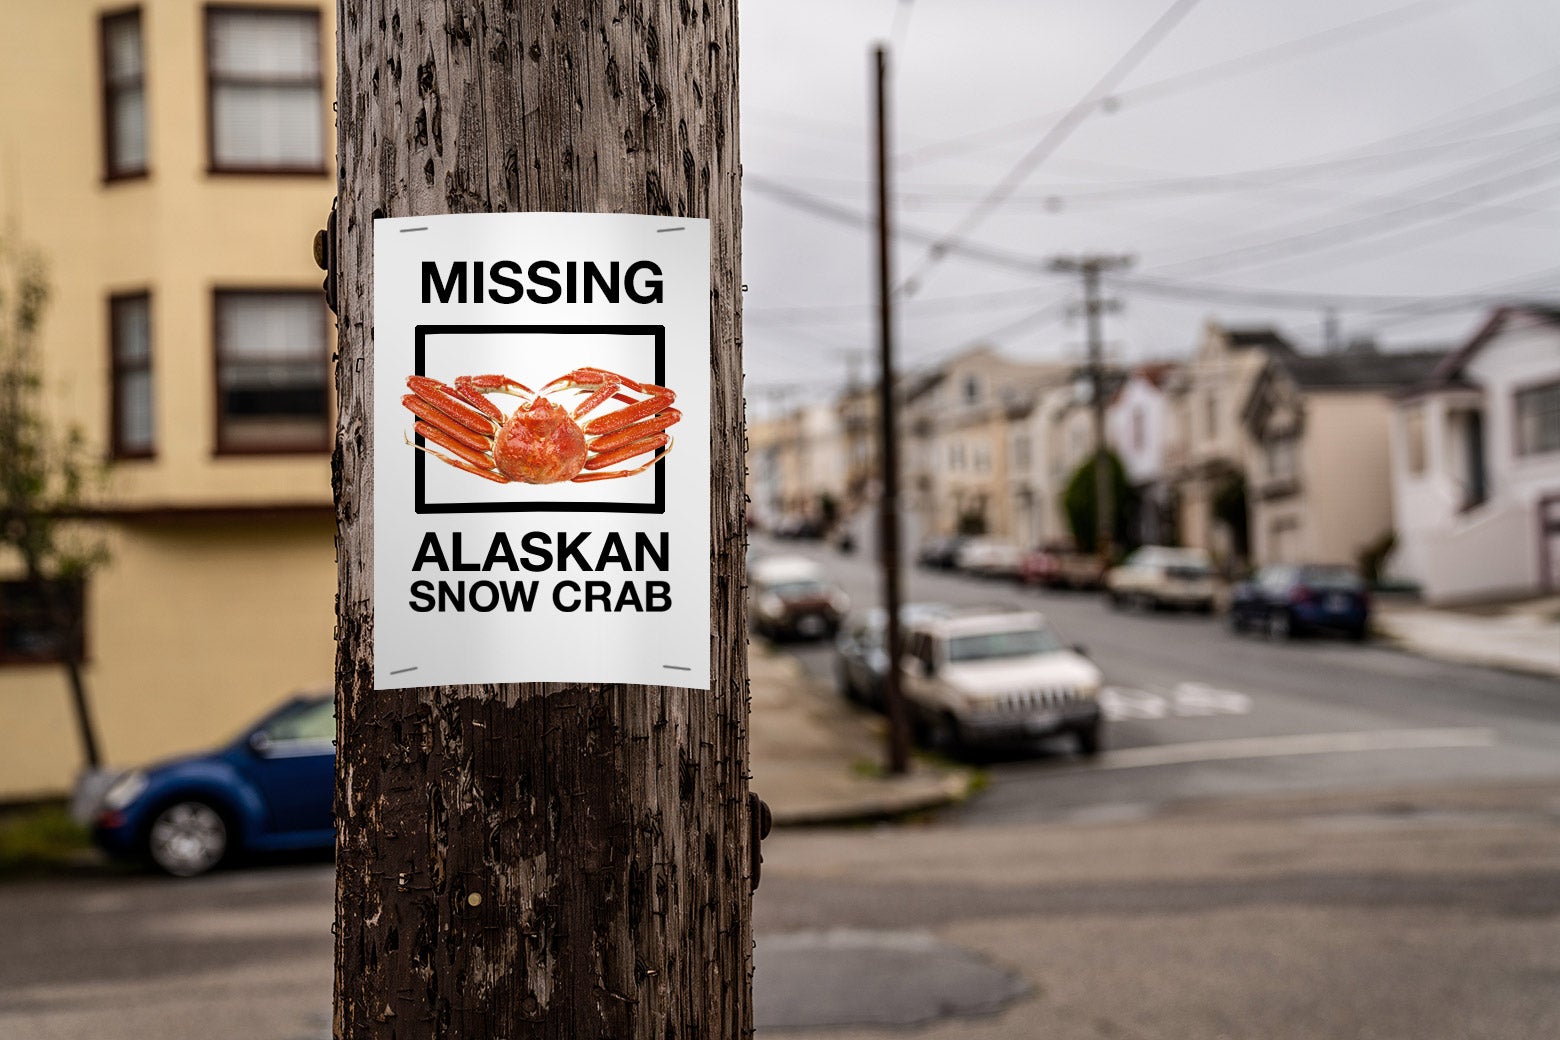 Photo illustration of a "missing" sign with an Alaskan snow crab